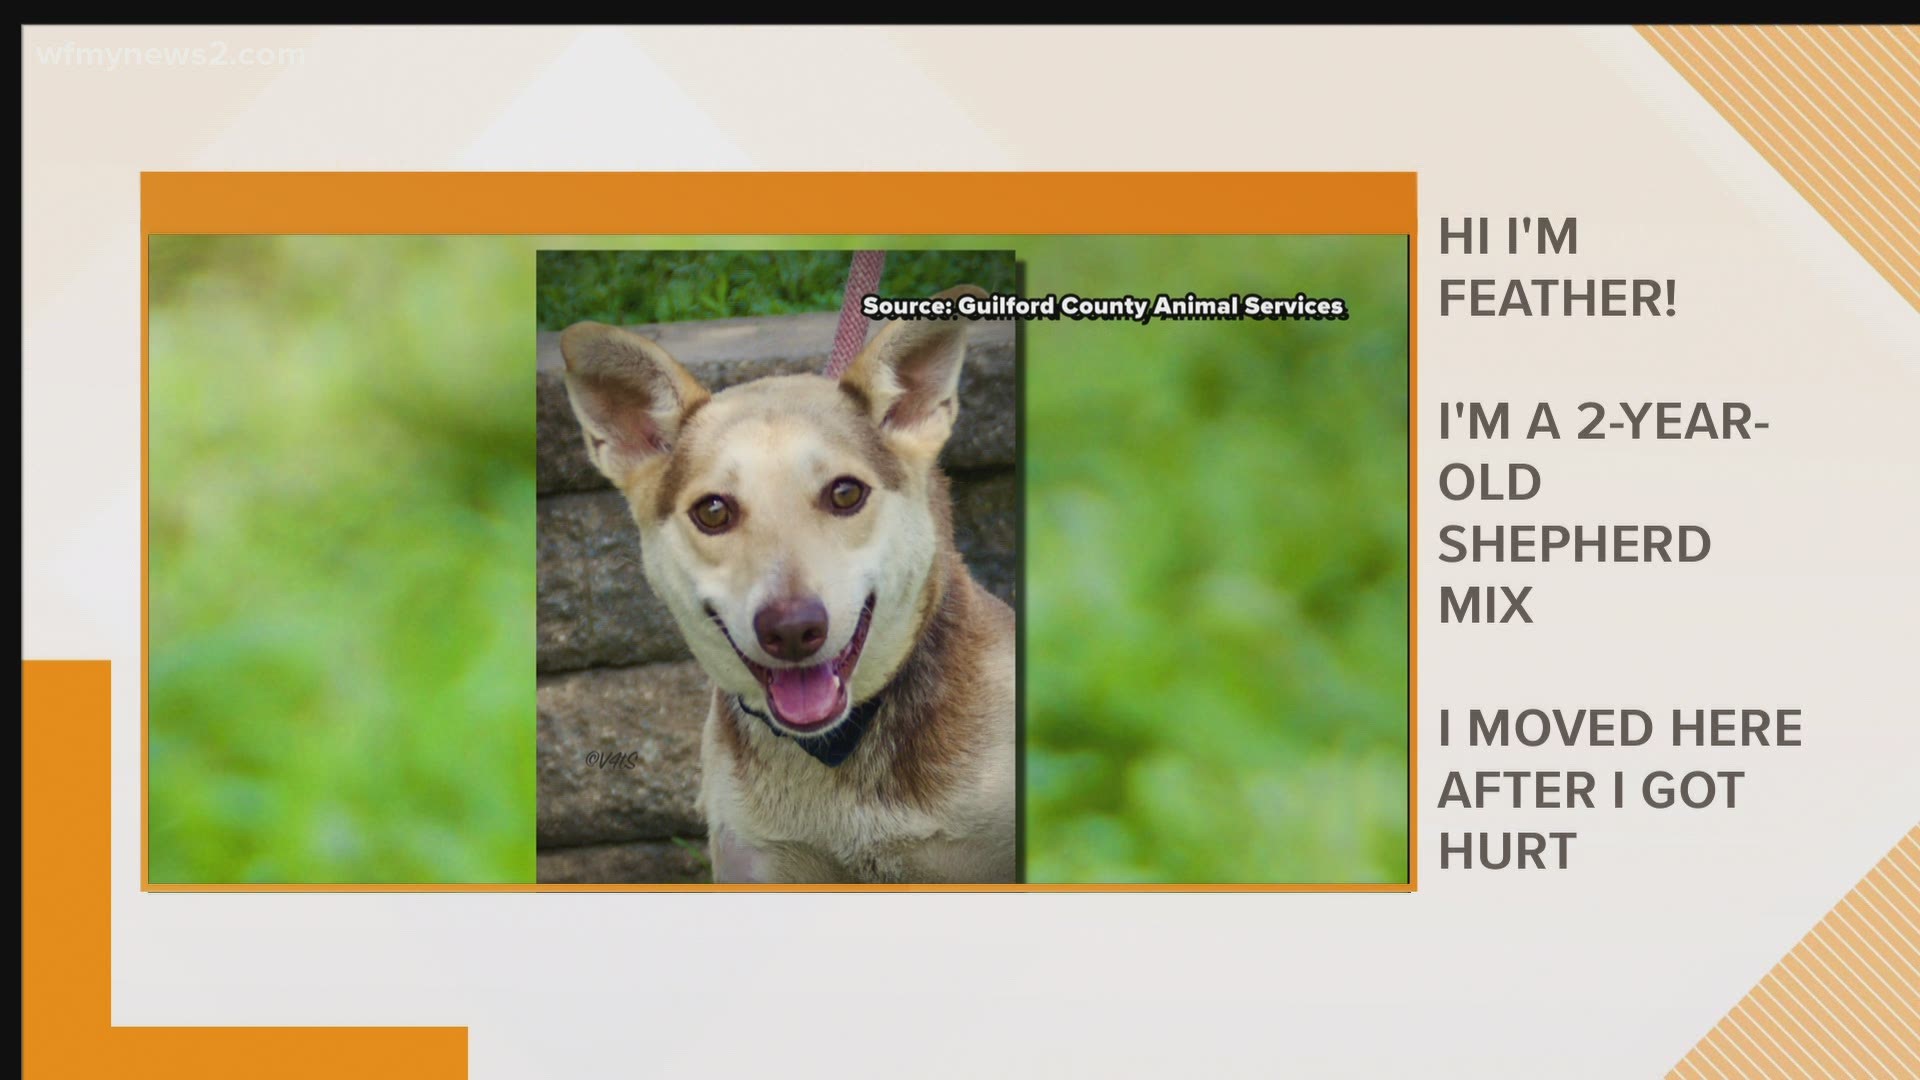 You can meet her at the Guilford County Animal Services.